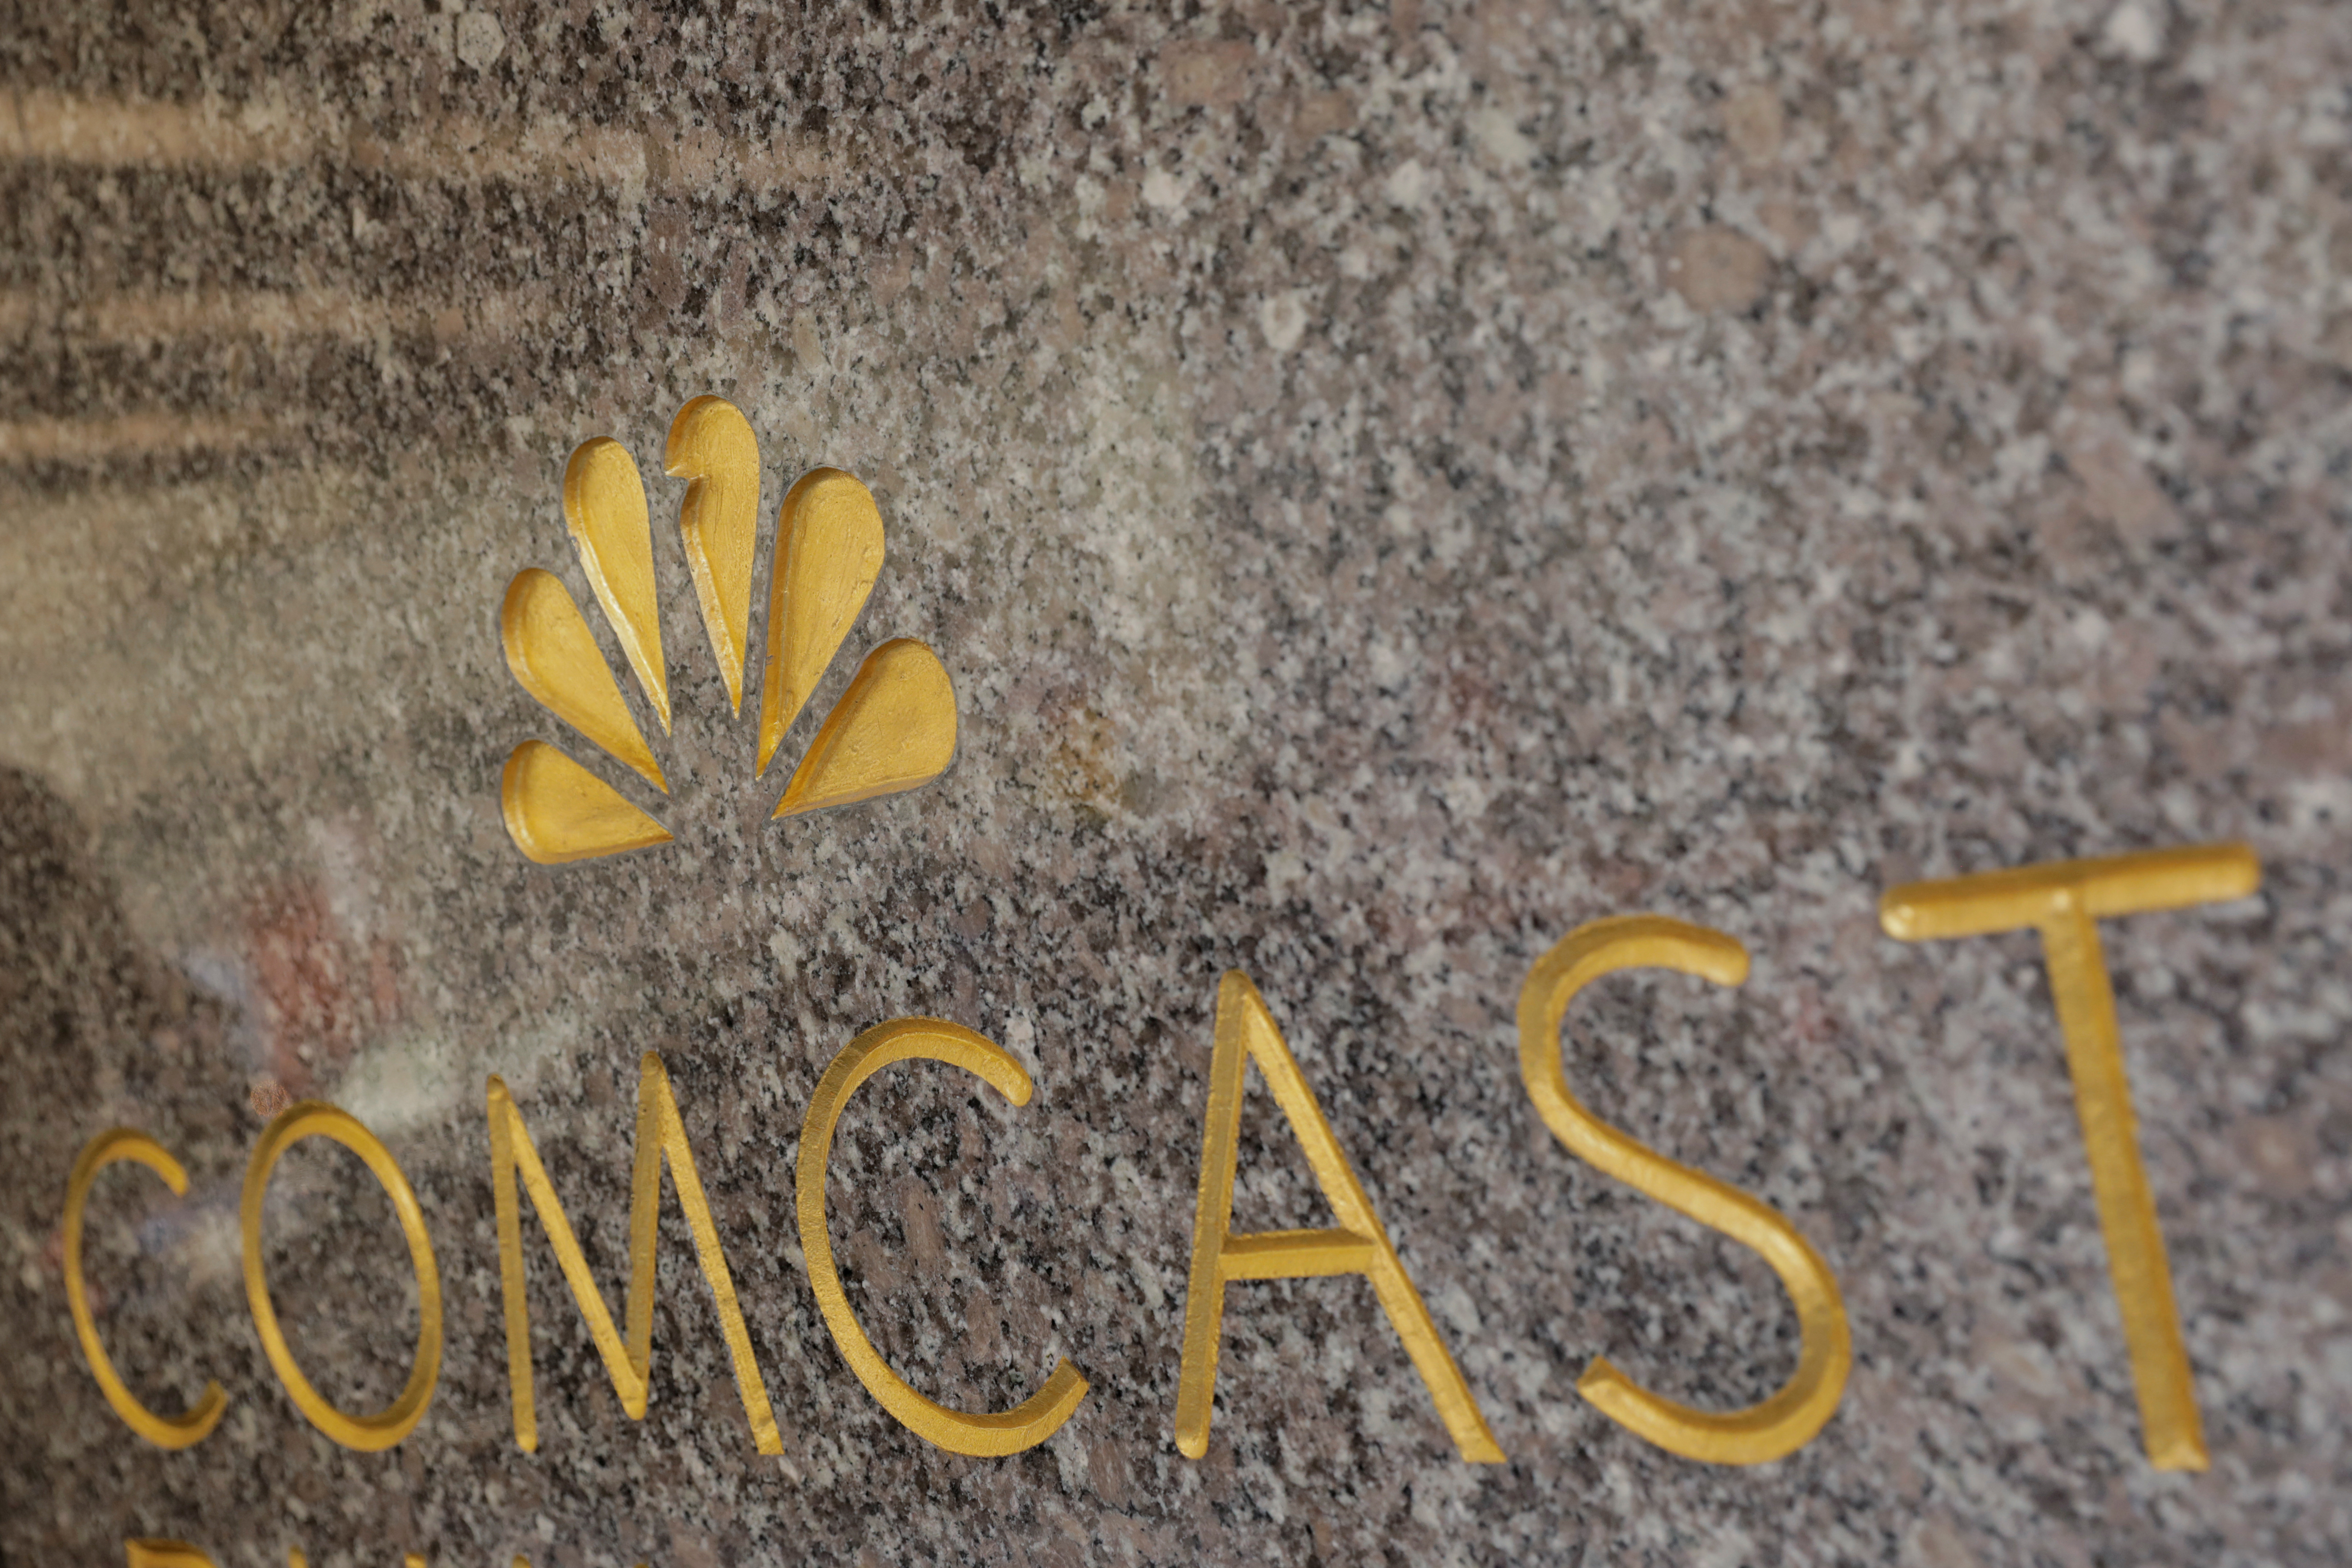 The NBC and Comcast logos are displayed on 30 Rockefeller Plaza in midtown Manhattan in New York